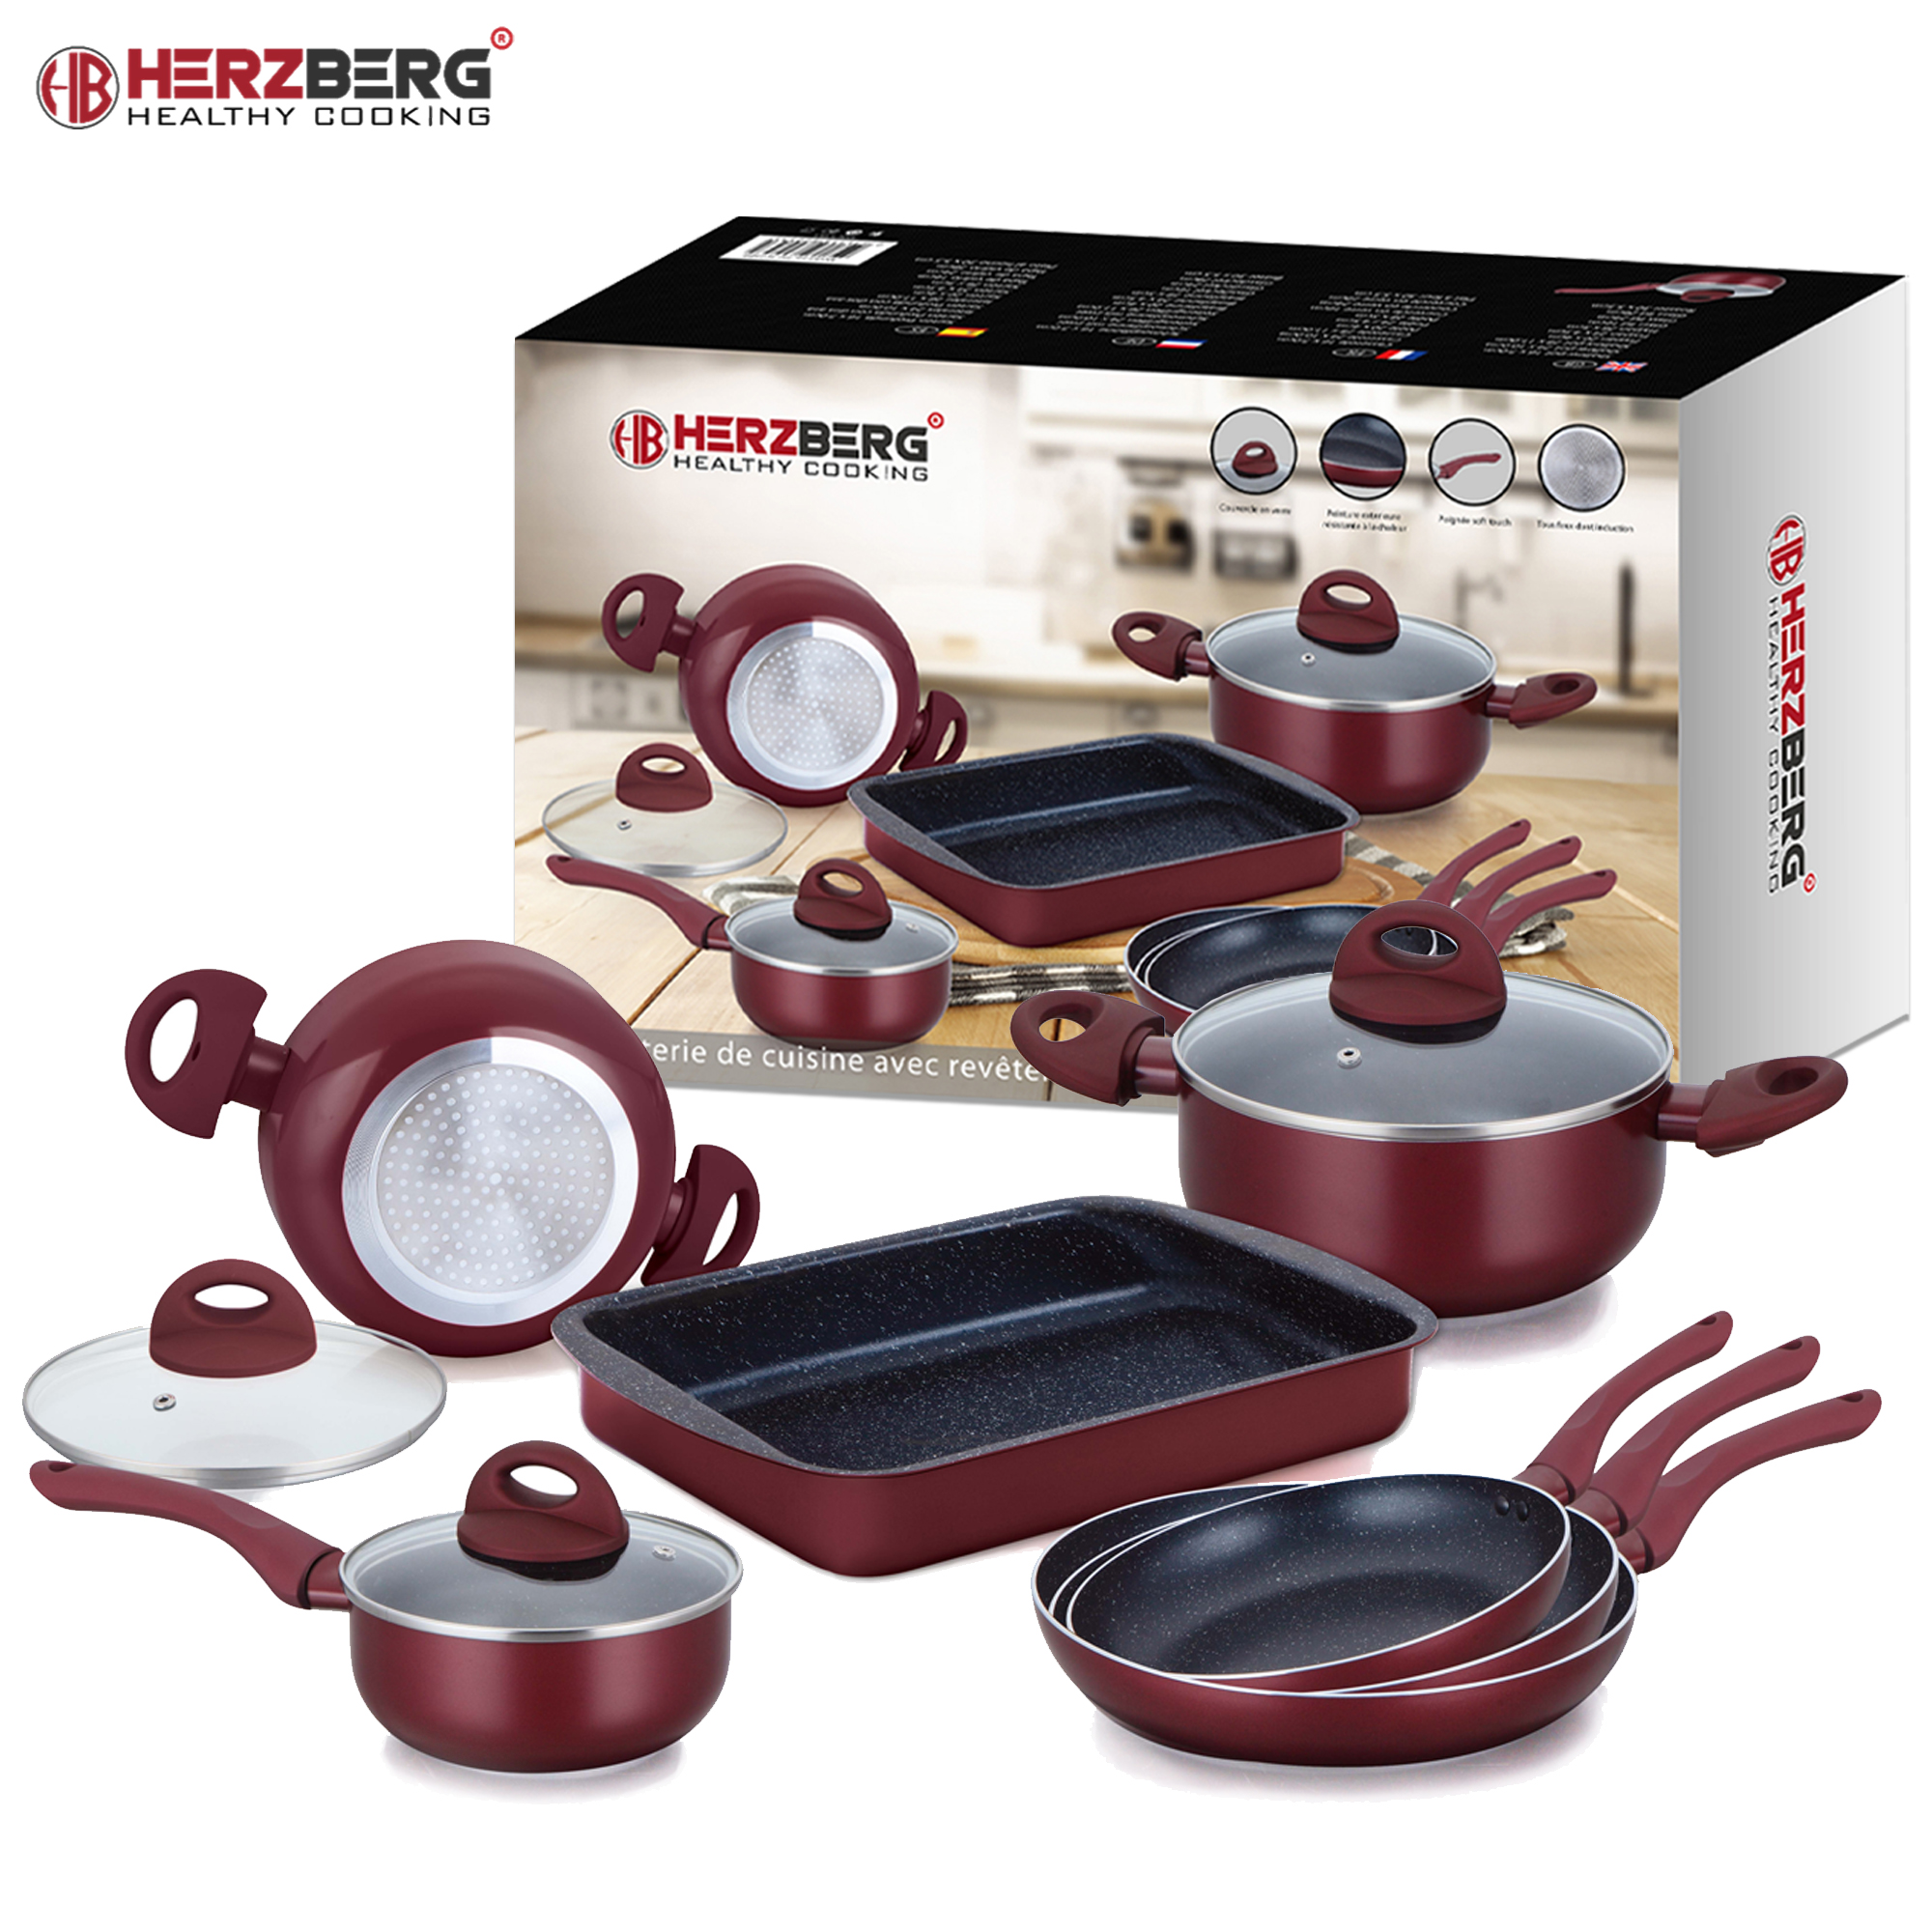 Herzberg HG-9016BR: 10 Pieces Marble Coated Cookware Set - Burgundy